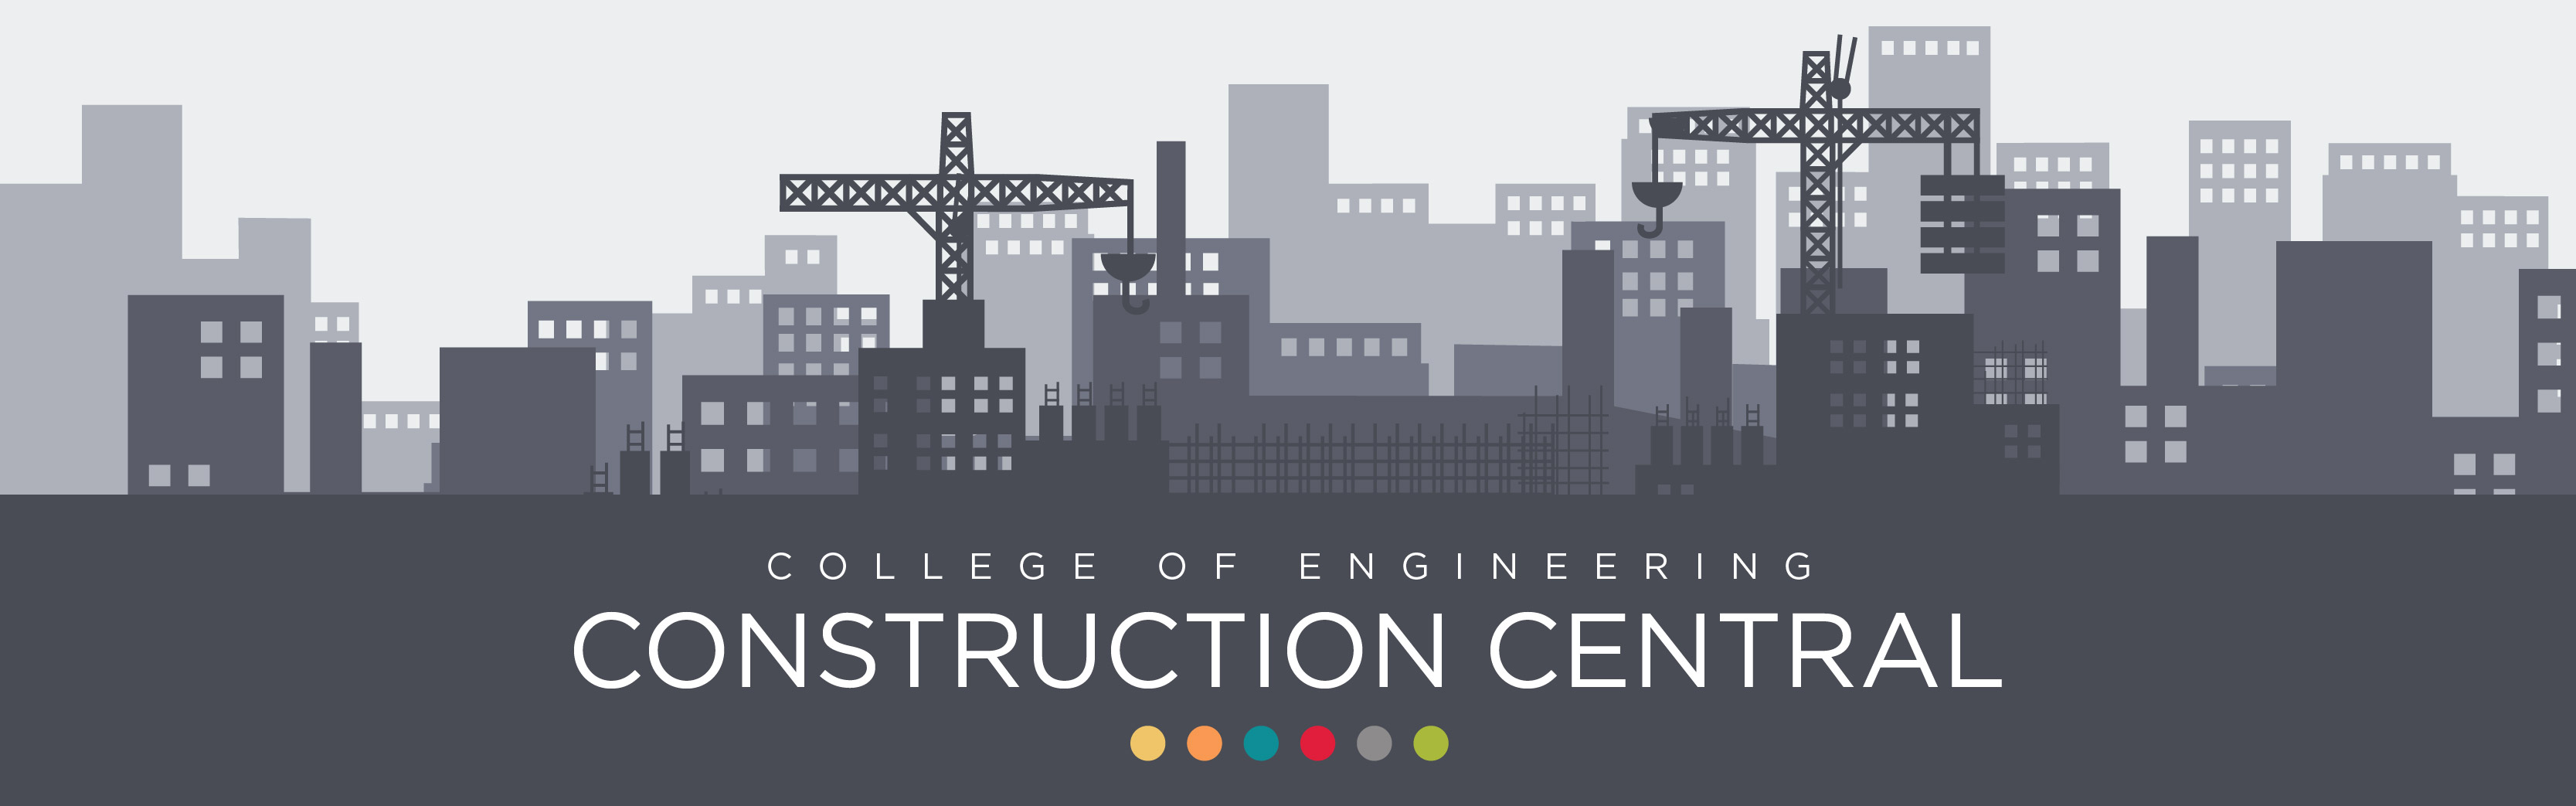 The Construction Central website will provide updates on the College of Engineering’s transformational facilities renovations and new construction.